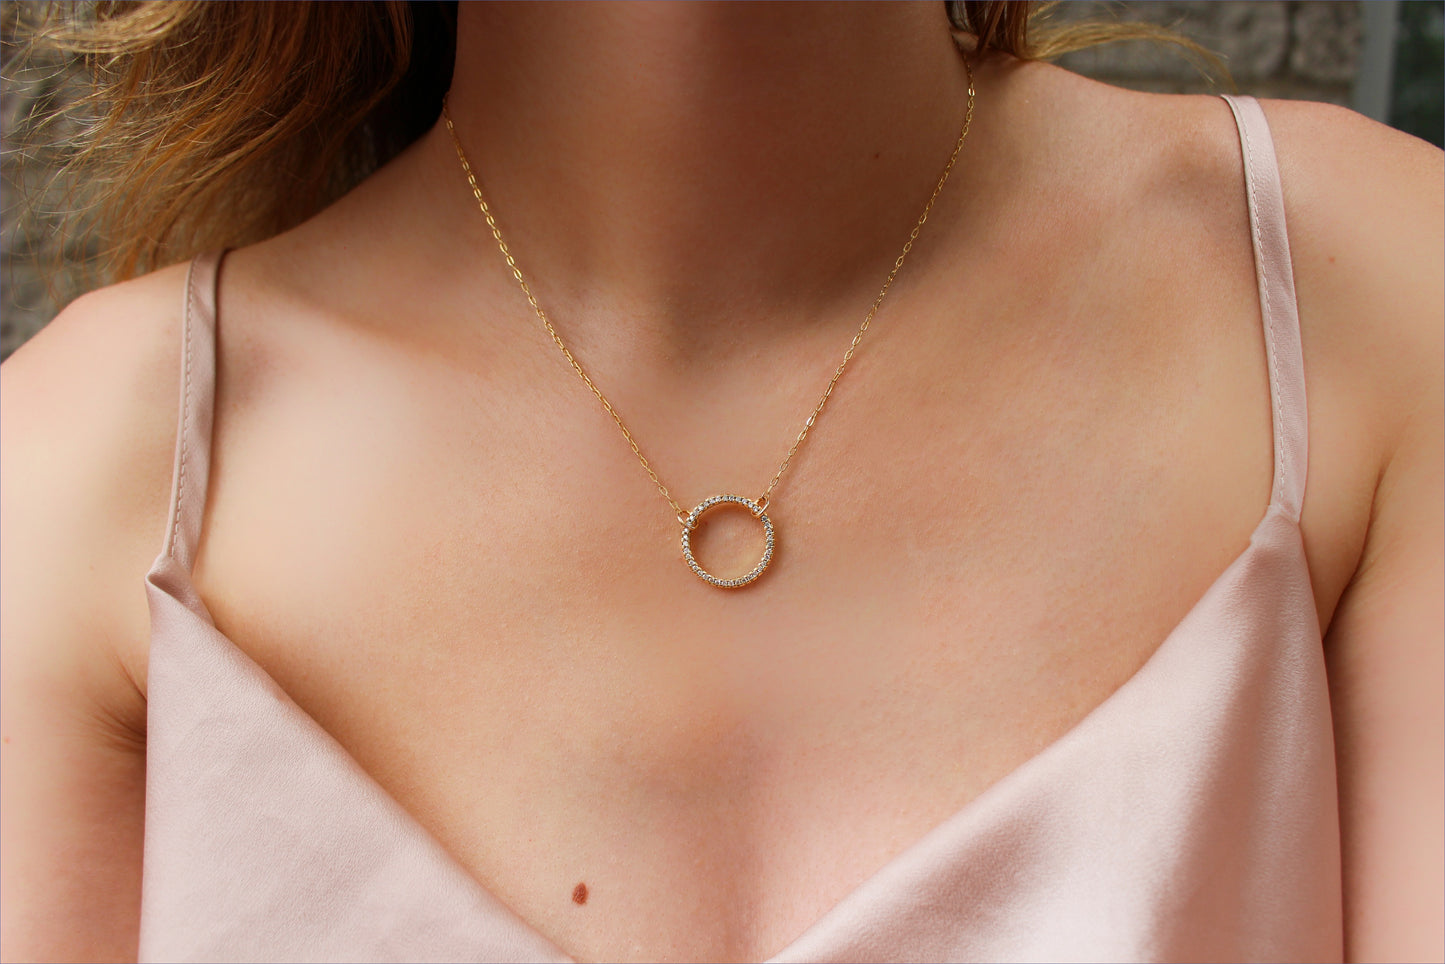 ORIELLE - 14K Gold Fill Rhinestone Necklace ∙ Gold necklace for woman ∙ Dainty Gold Circle ∙ Minimalist Necklace ∙ Shiny Necklace